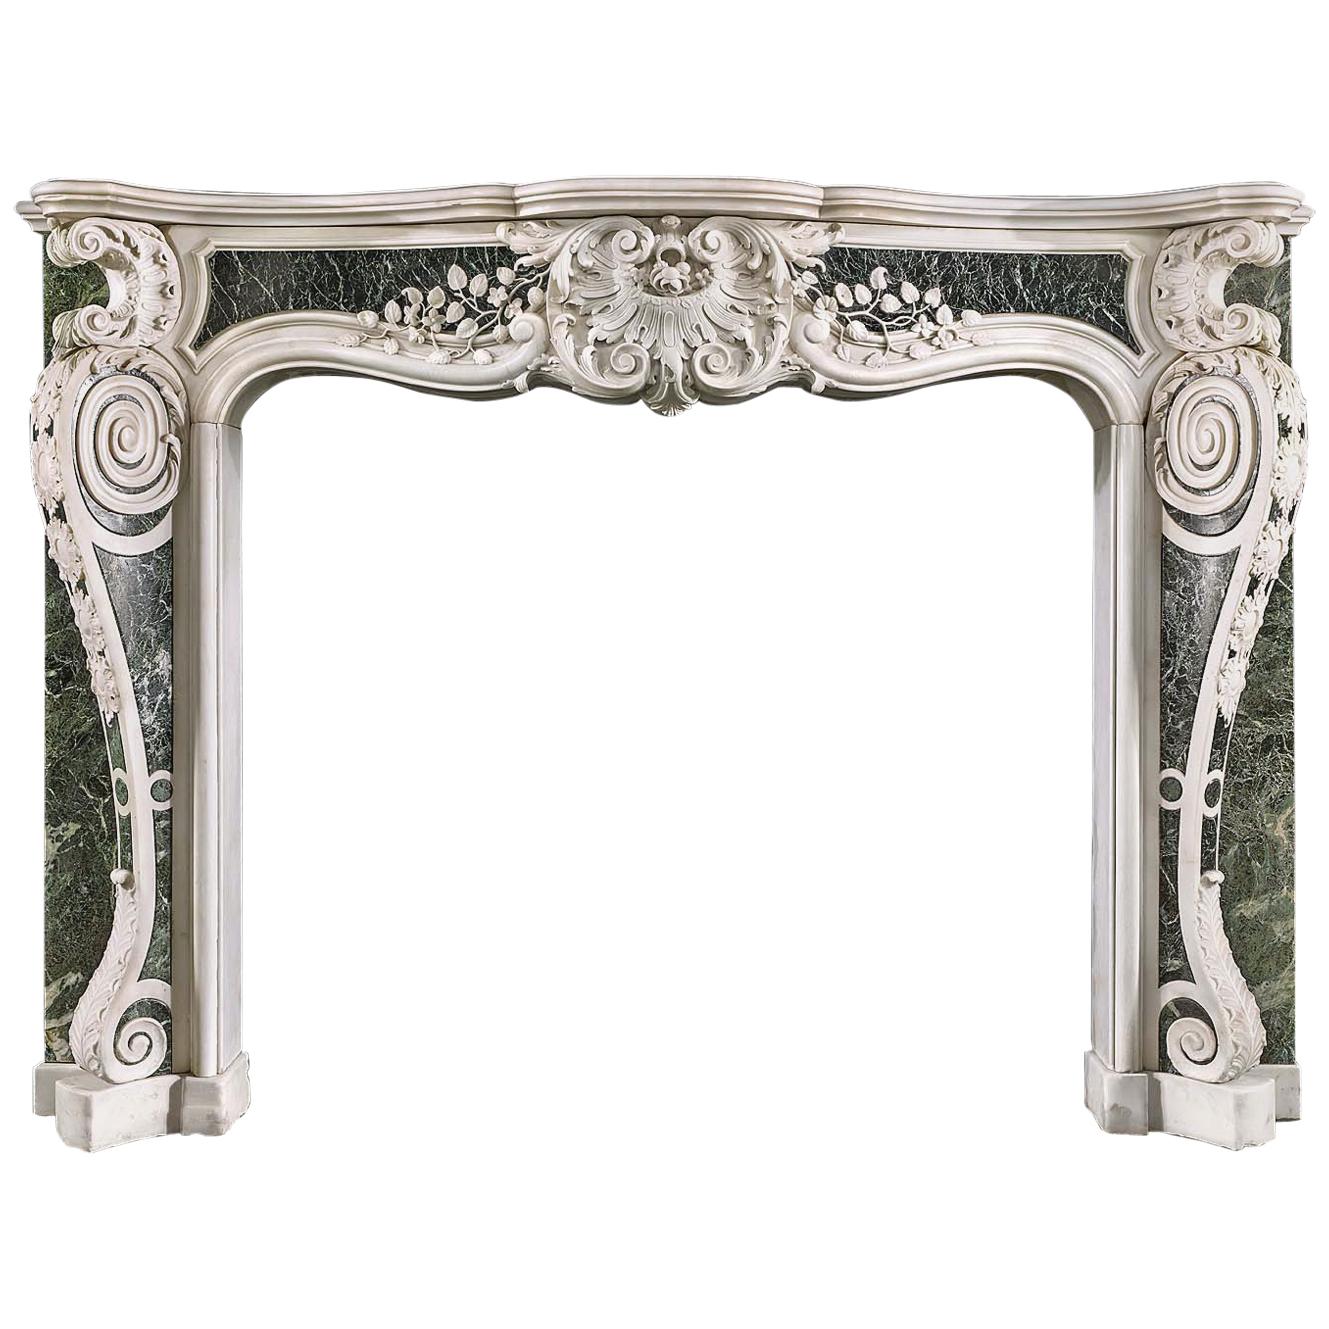 George II Rococo Chimneypiece in White Statuary and Verde Antico Marble